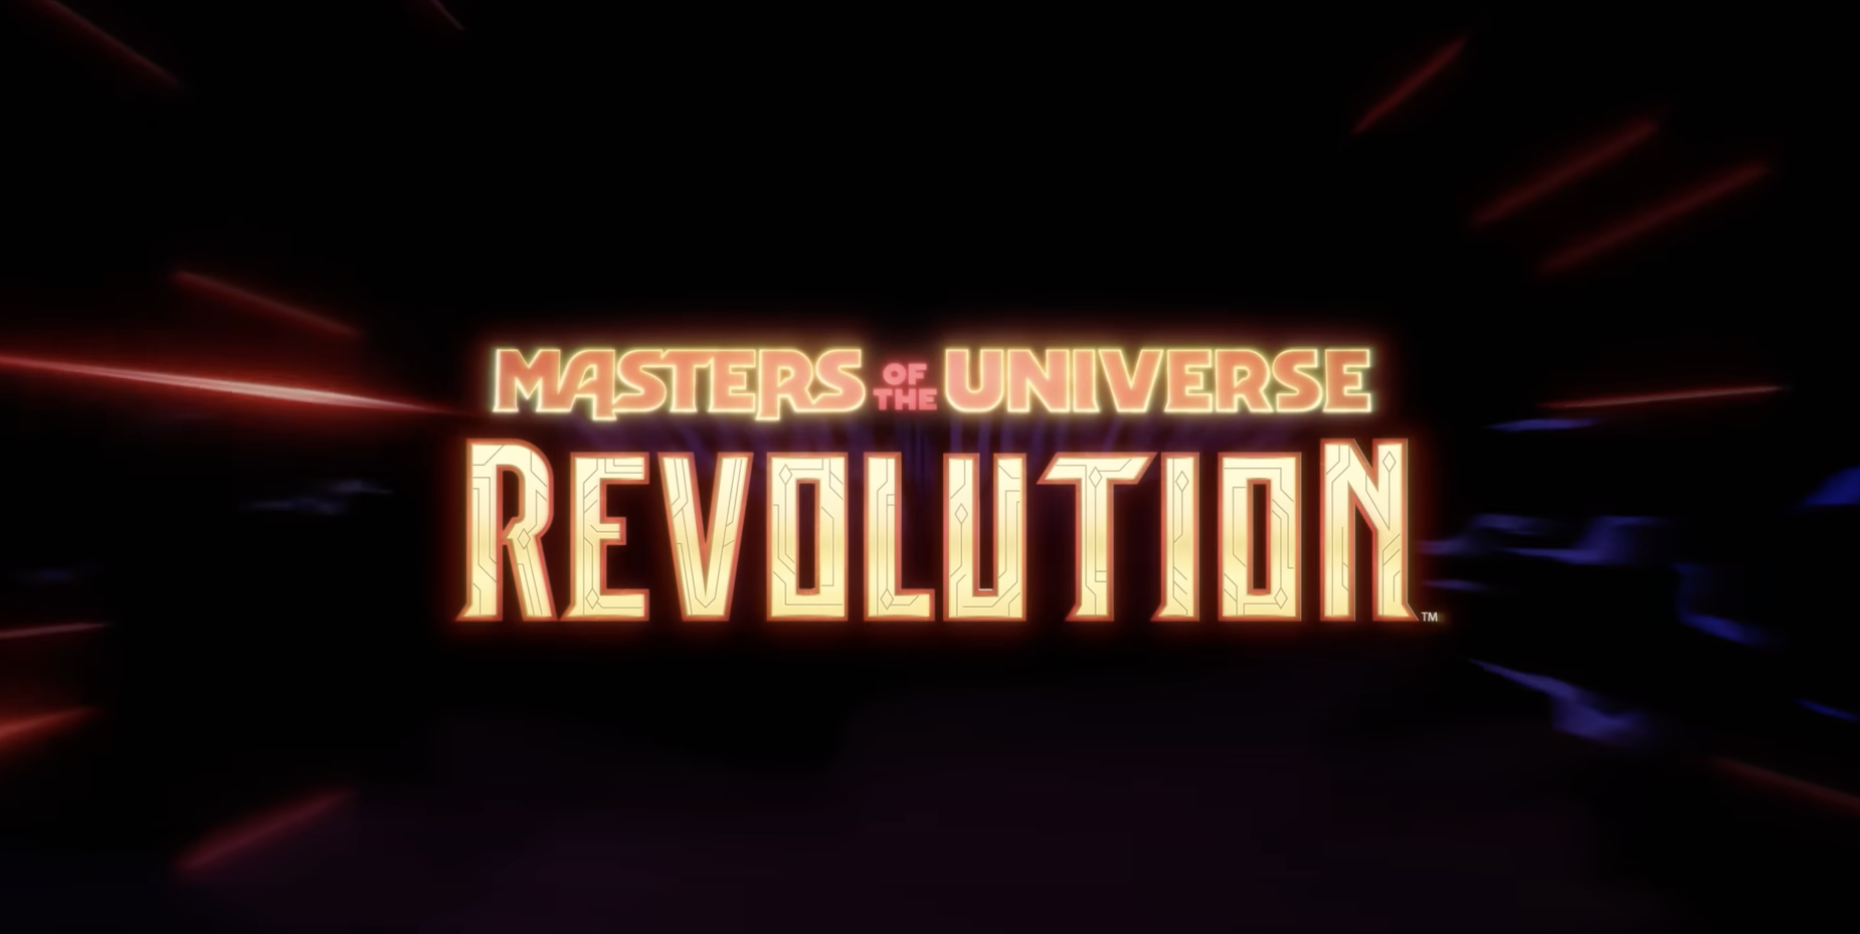 He-Man Returns In MASTERS OF THE UNIVERSE: REVOLUTION!